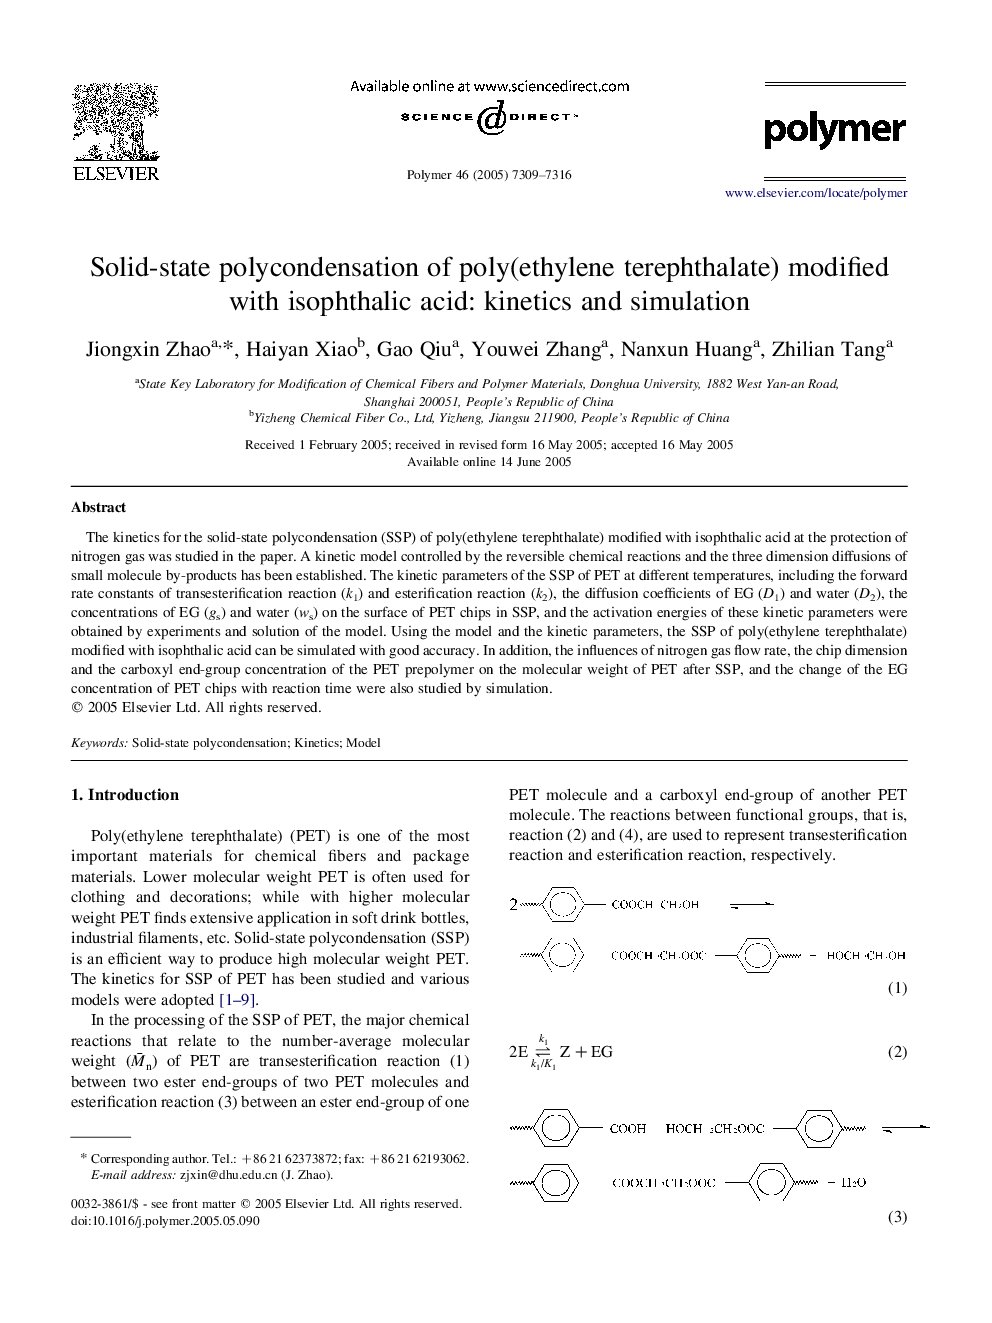 Solid-state polycondensation of poly(ethylene terephthalate) modified with isophthalic acid: kinetics and simulation